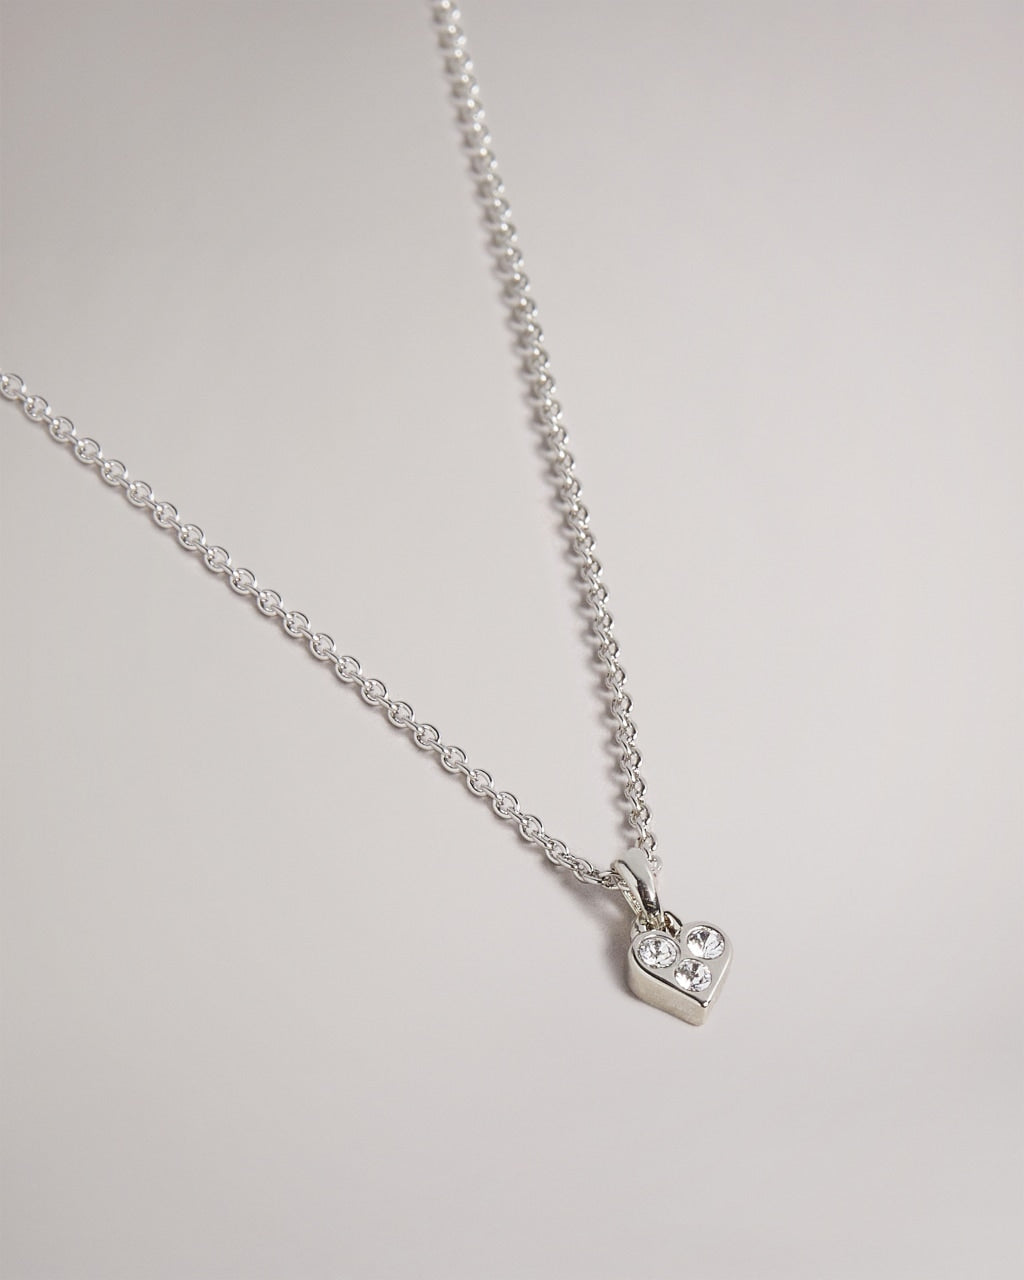 Neeno Nano Heart Pendant in Silver | eightywingold - official partner of Ted Baker